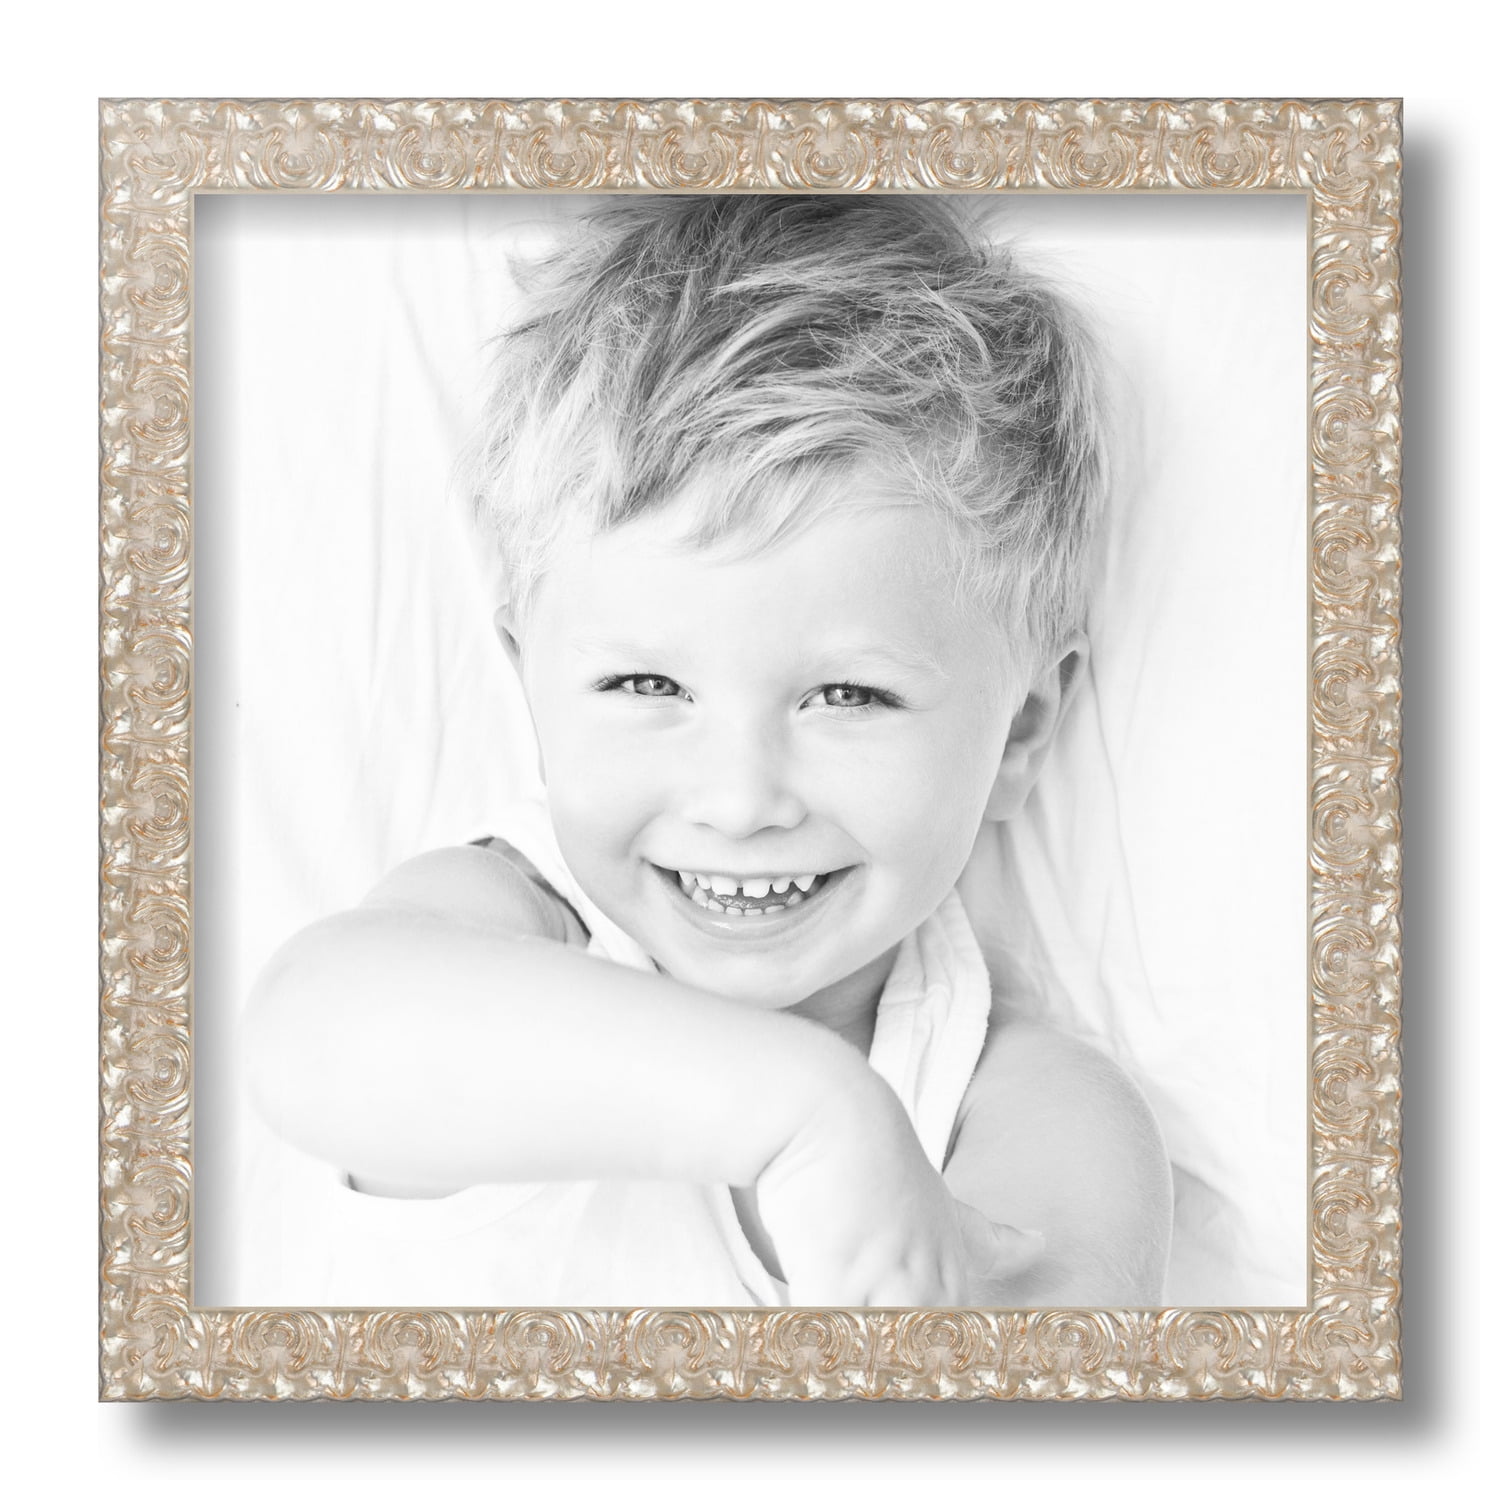 ArtToFrames 12x12 Inch Silver Thin Picture Frame, This Silver Wood Poster  Frame is Great for Your Art or Photos, Comes with Regular Glass (4904)